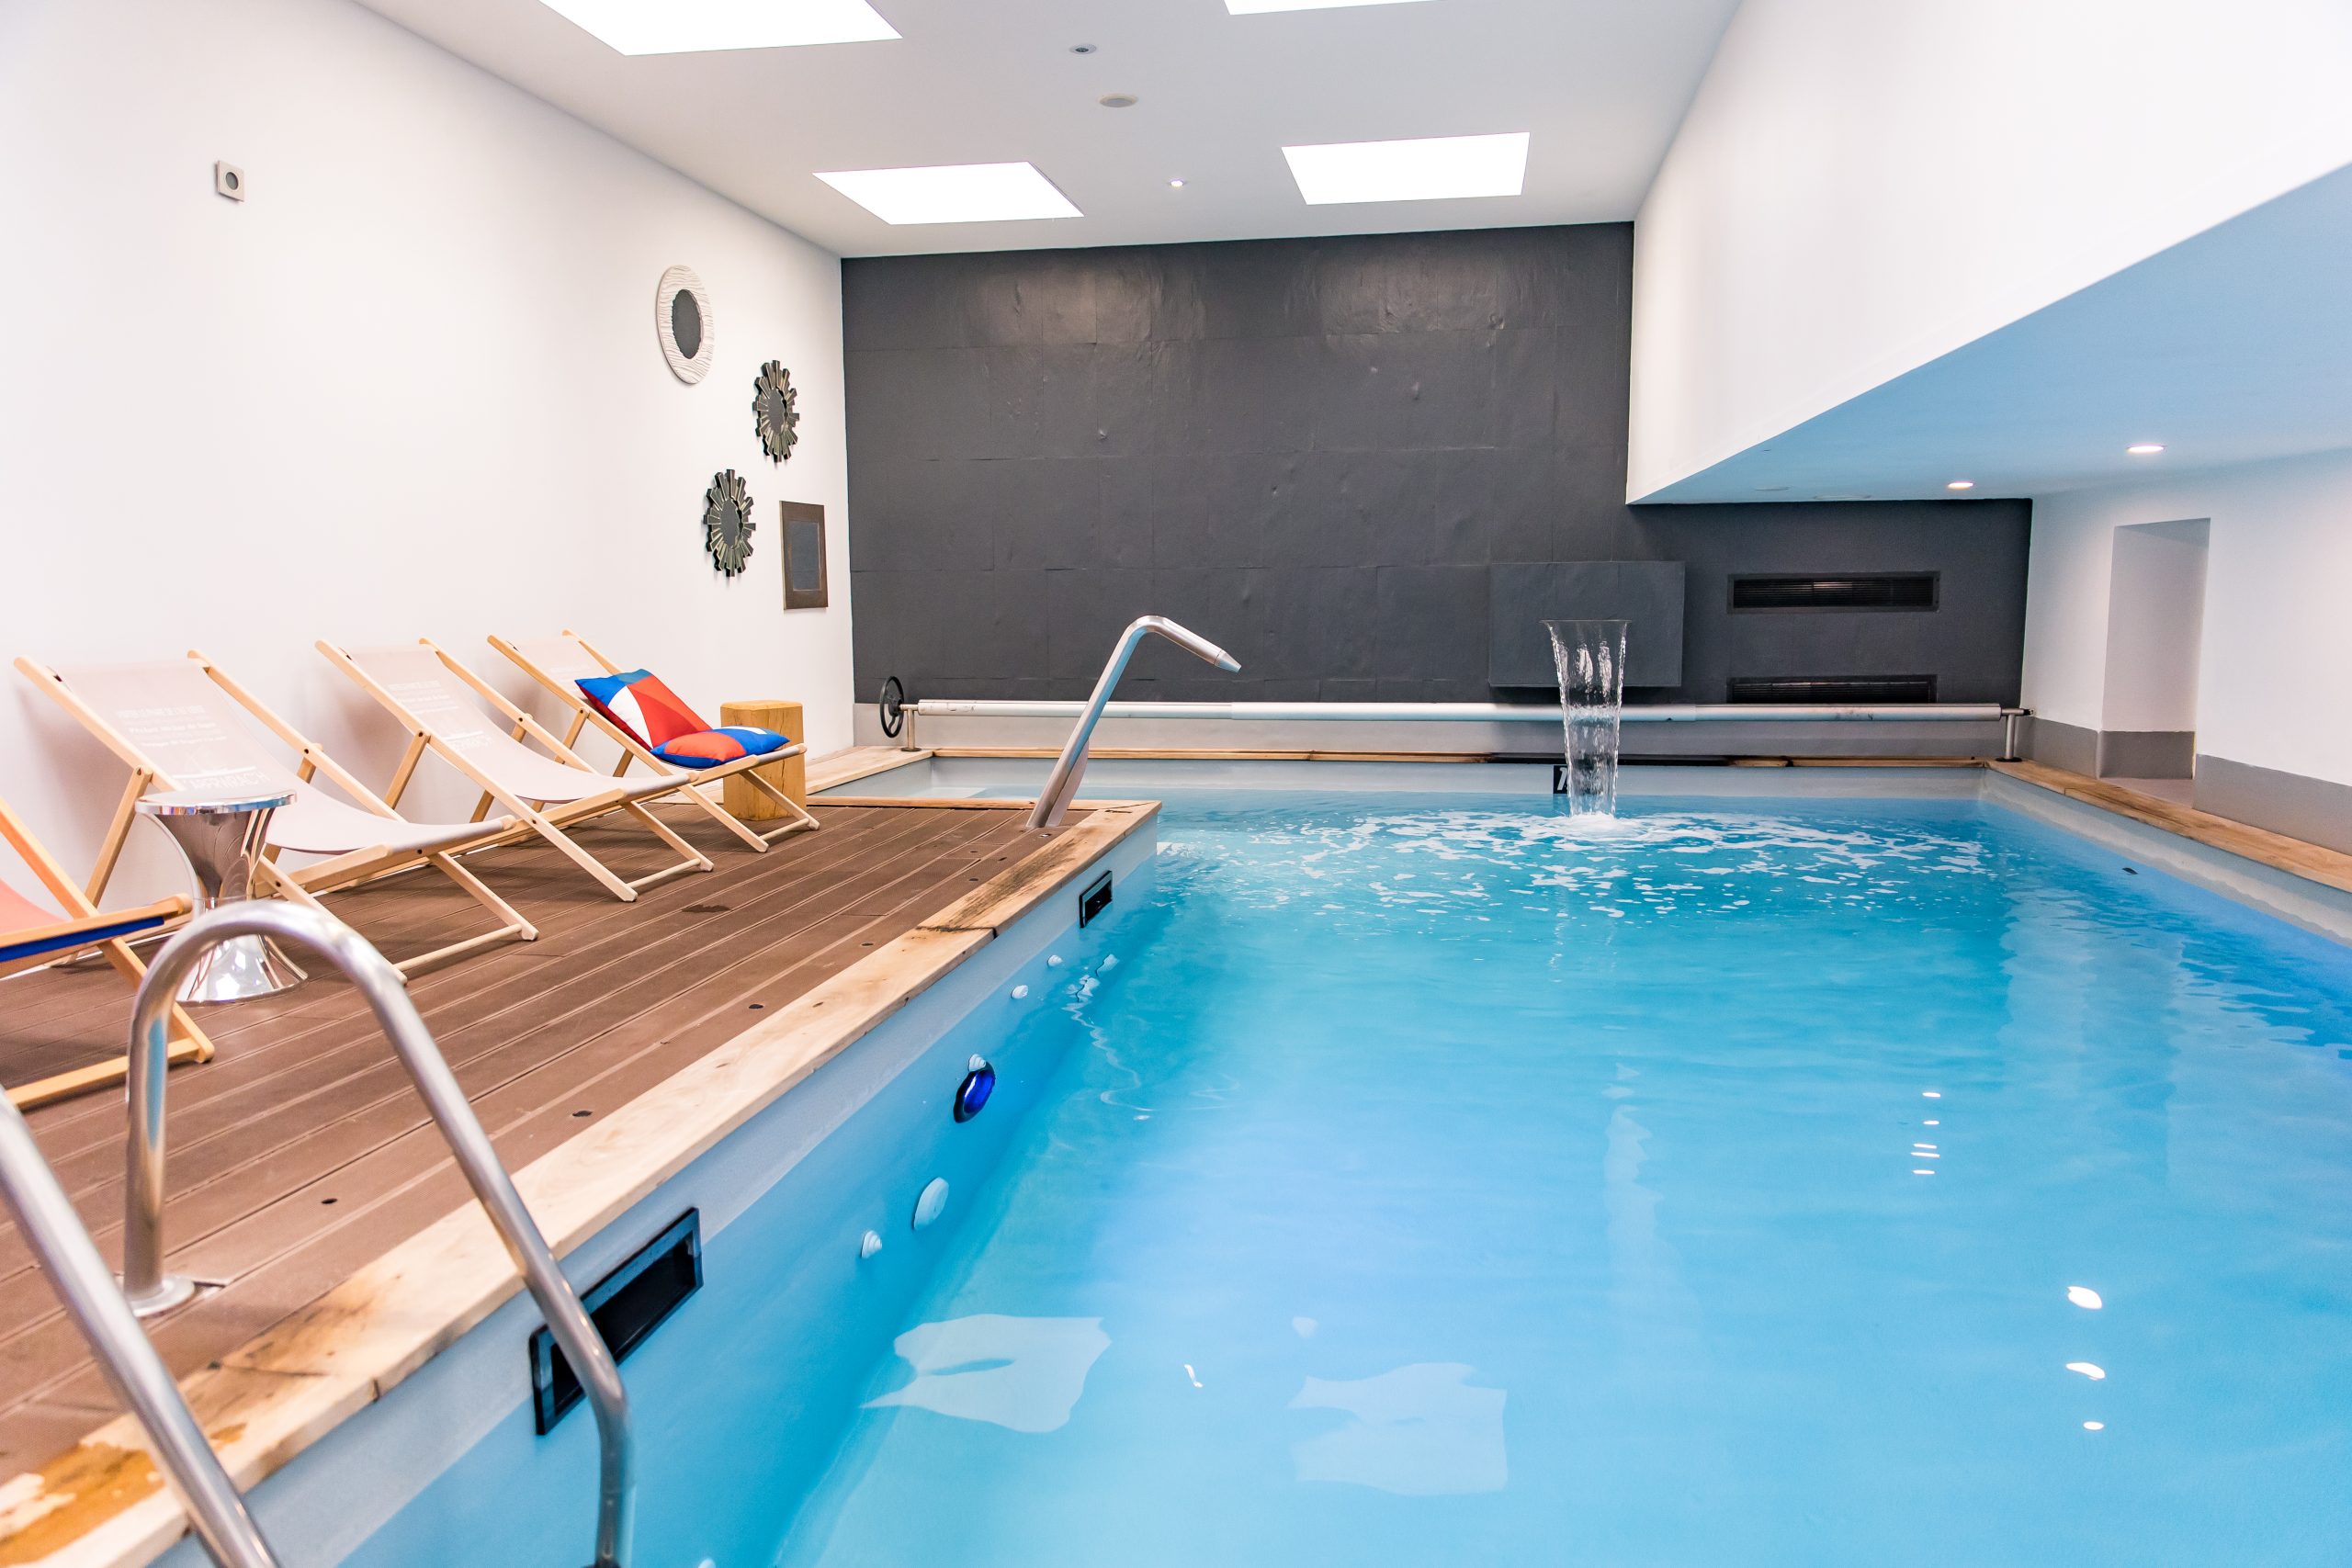 illuminated indoor pool with sun loungers and decorative wall - hotel spa finistere